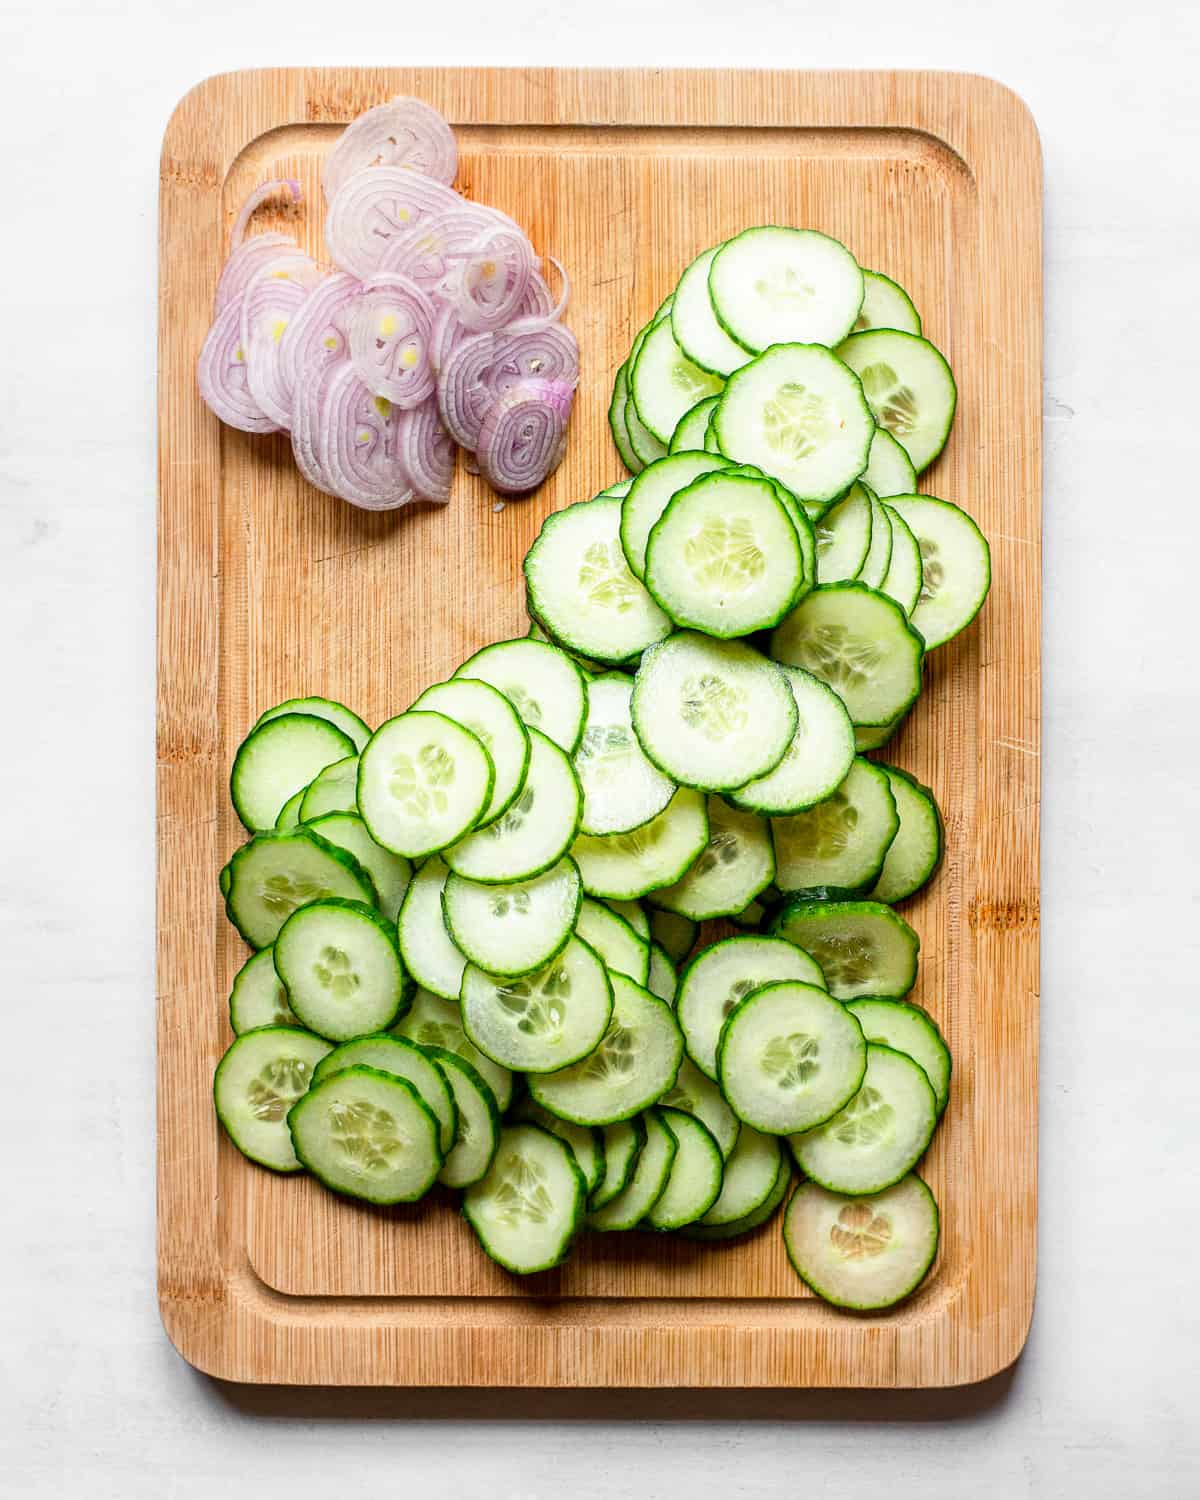 Sliced cucumbers and sliced shallots on a wooden cutting board.